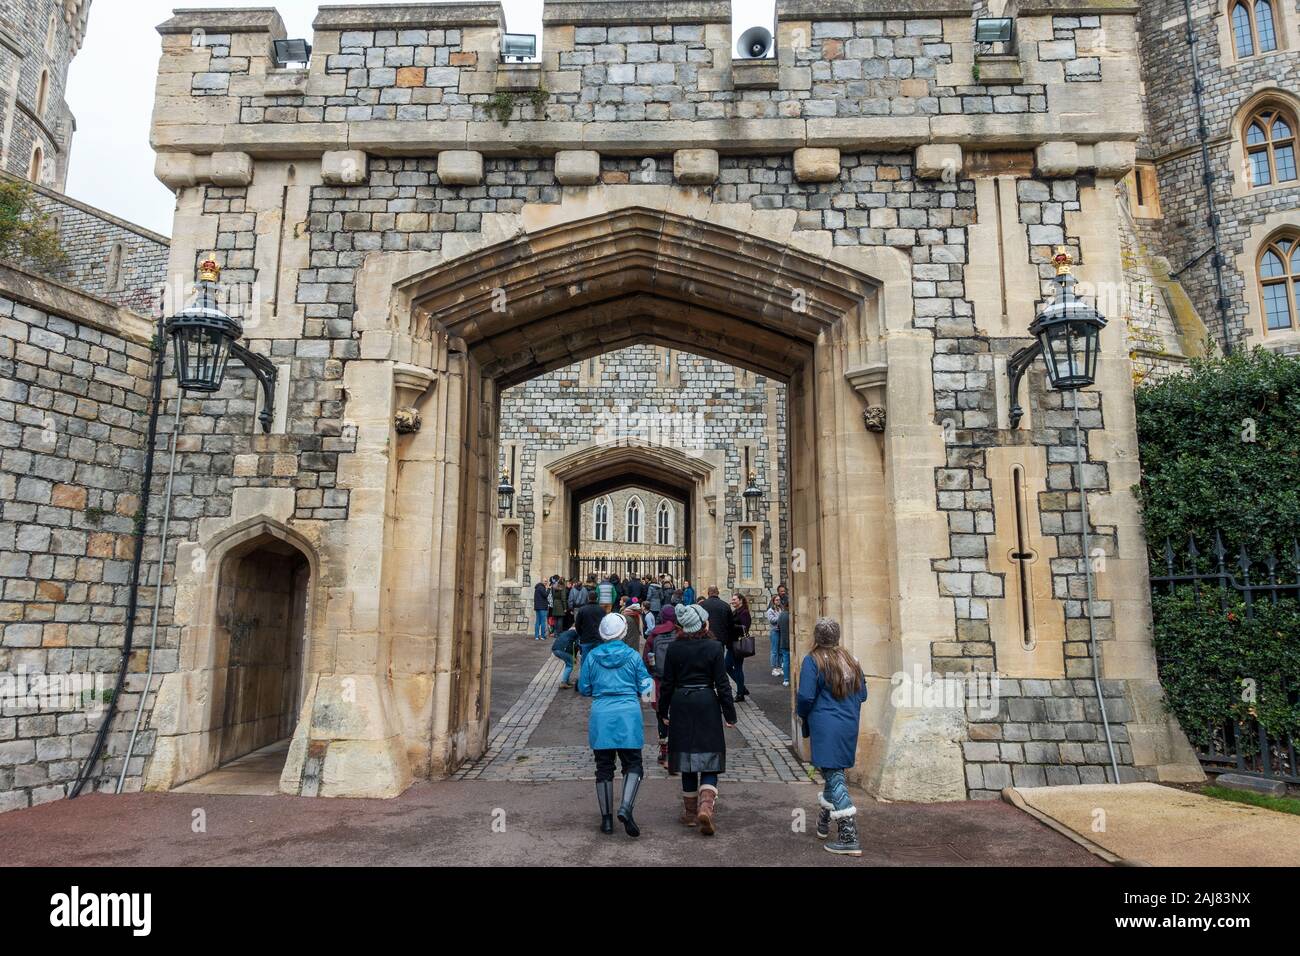 Tourists entering the Edward III Tower Gate at Windsor Castle in Windsor, Berkshire, England, United Kingdom Stock Photo